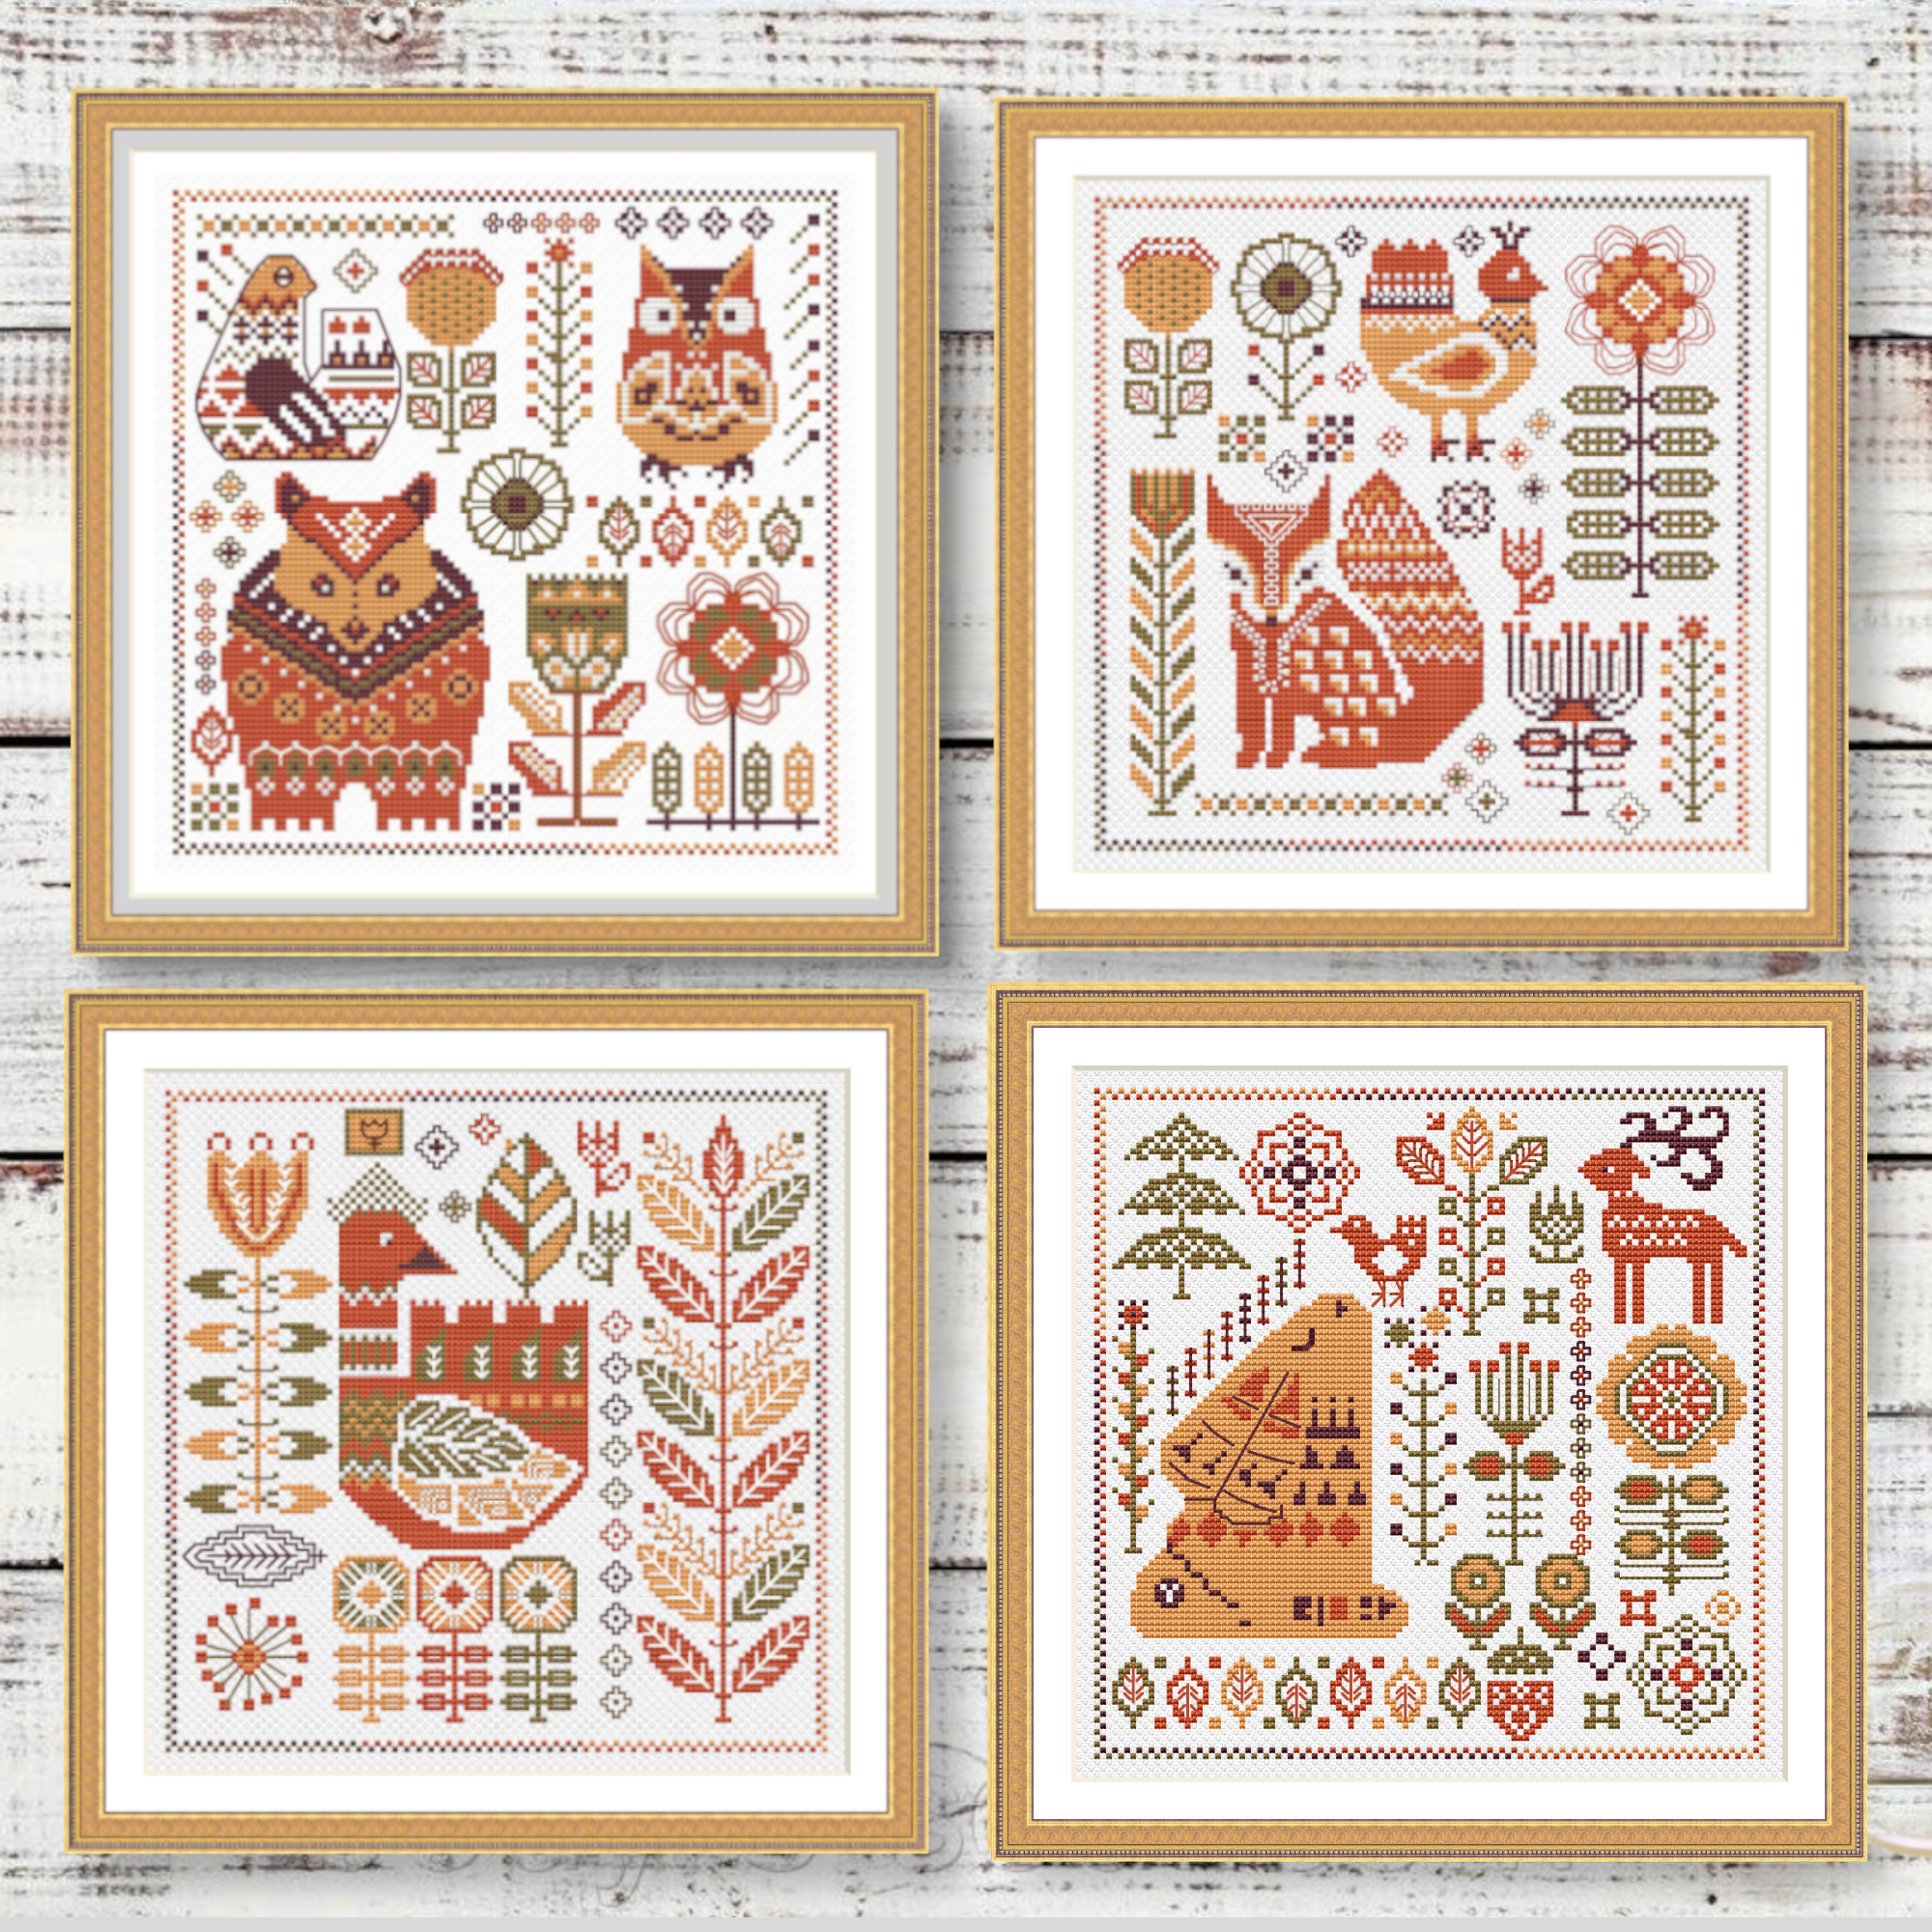 Andes Ode Cross Stitch Pattern - Set of 5